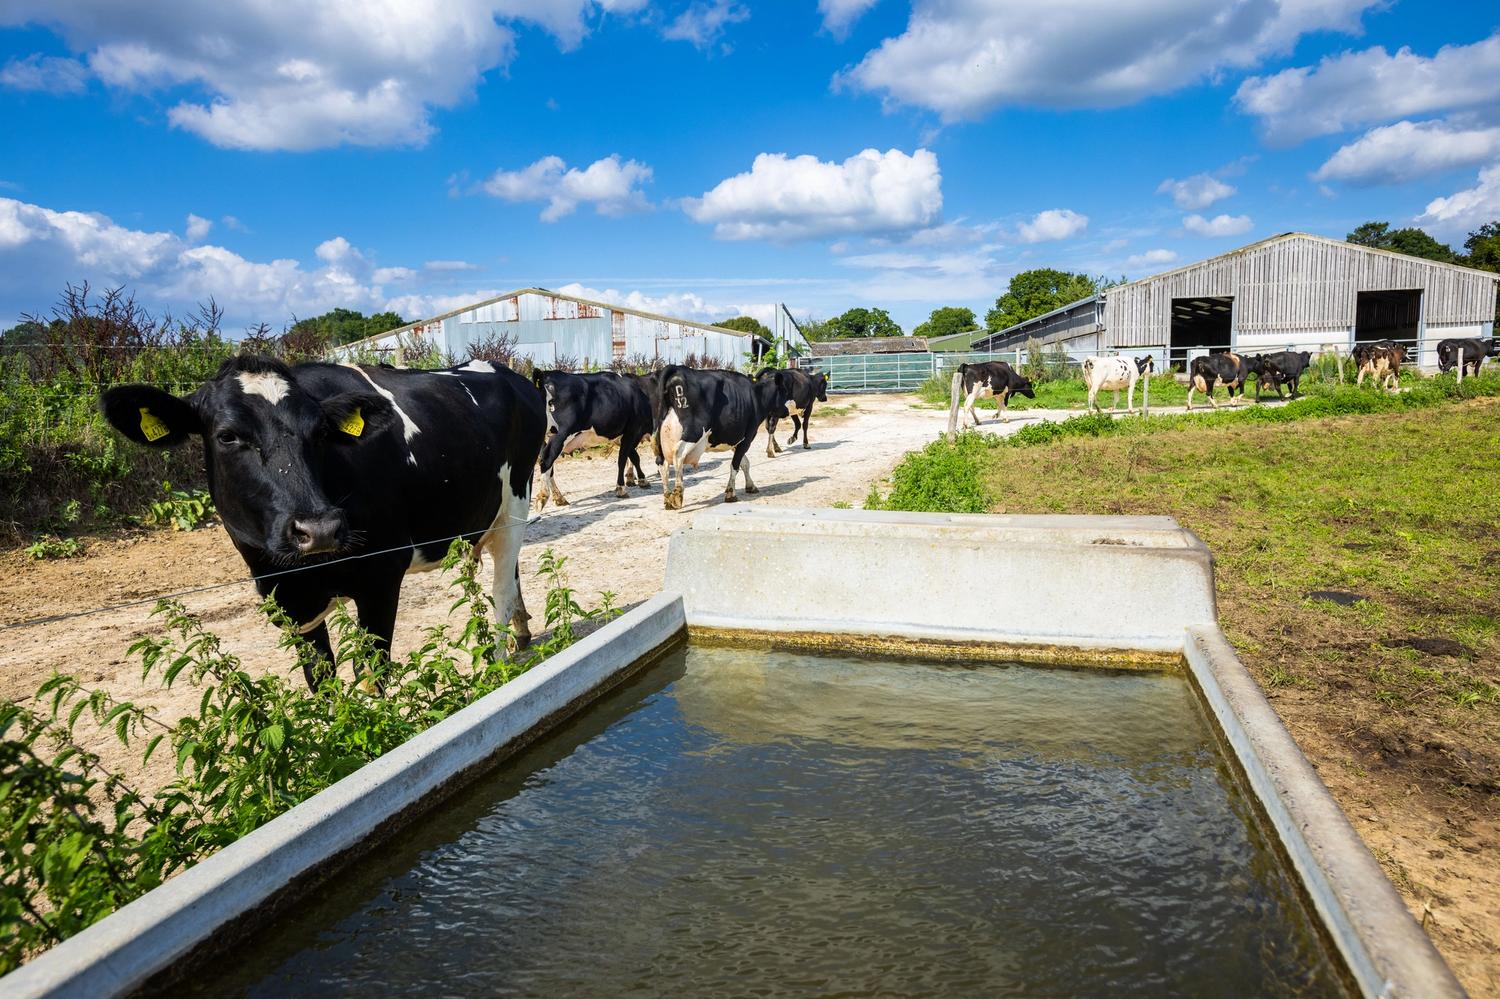 Herd of black and white cows walking past their water trough. One cow poses for the camera